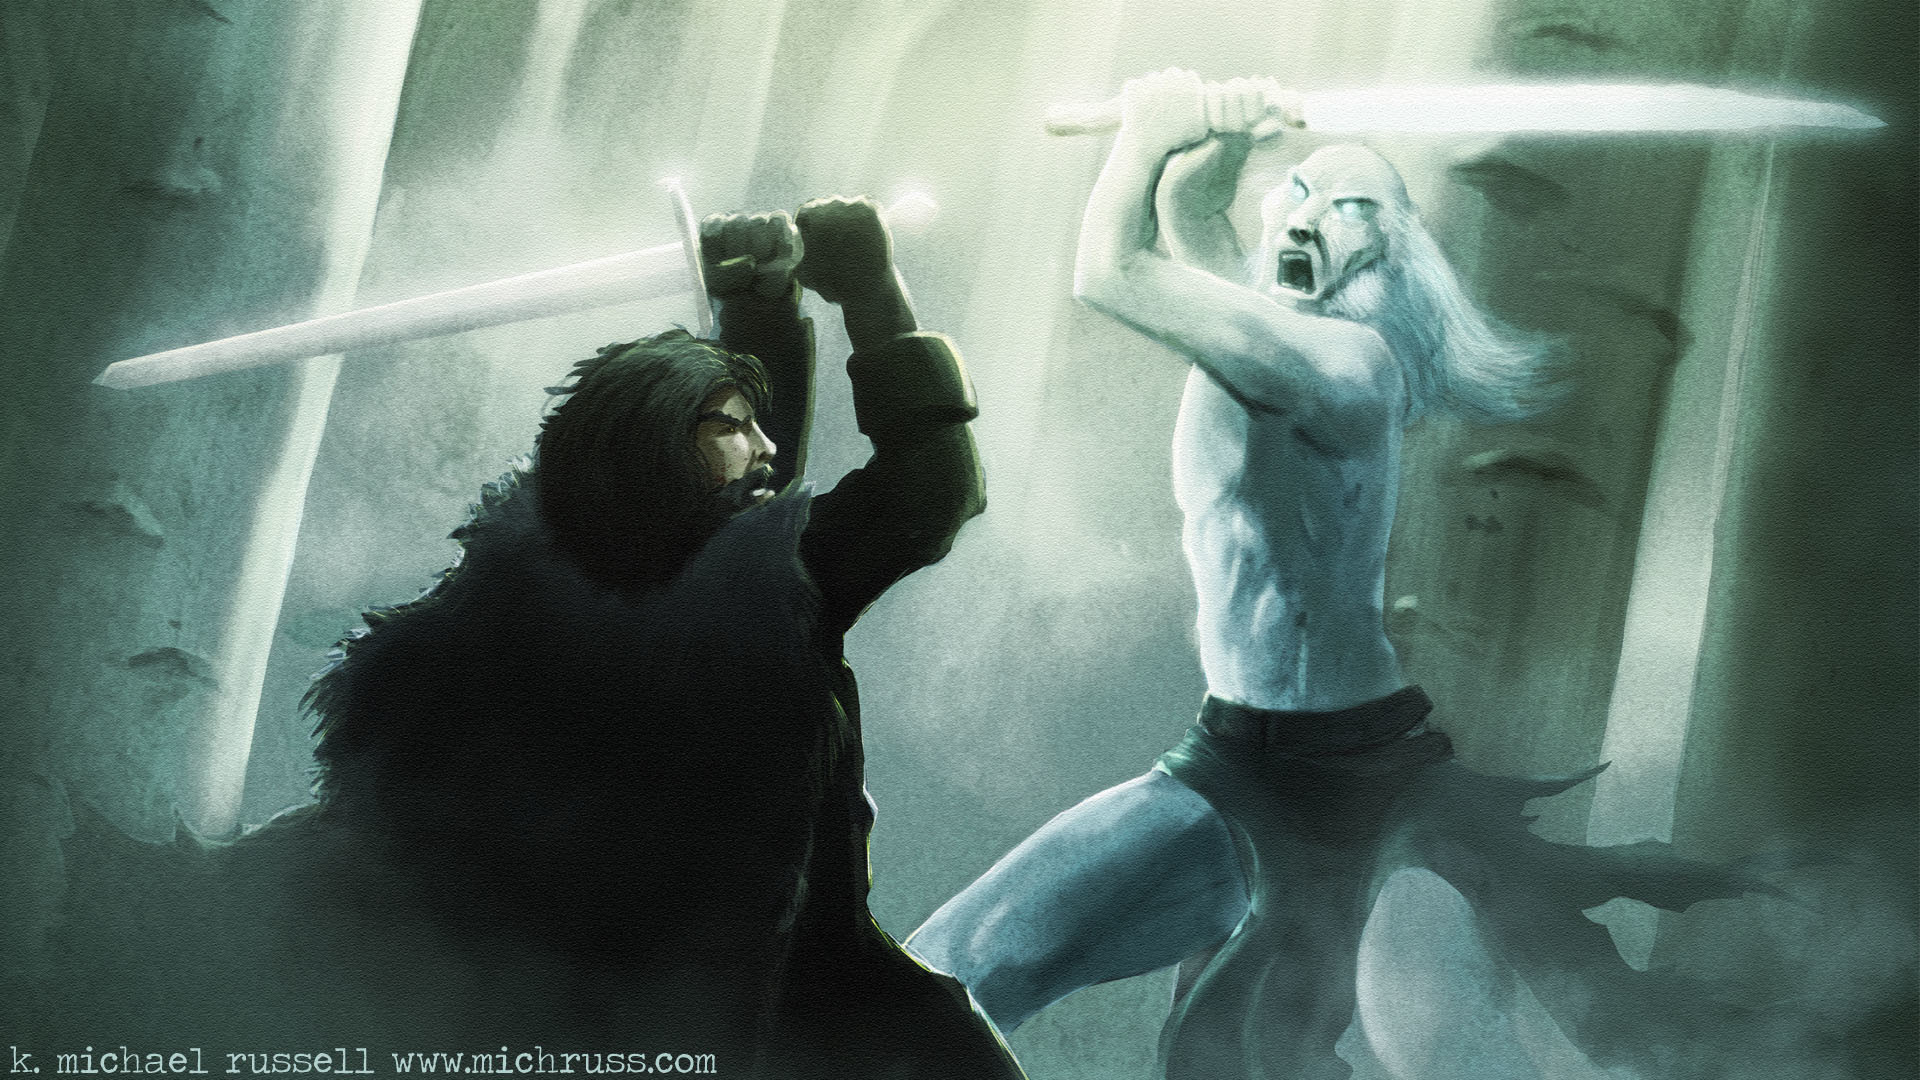 1920x1080 ... Game of Thrones: man of the wall vs white walker by kmichaelrussell